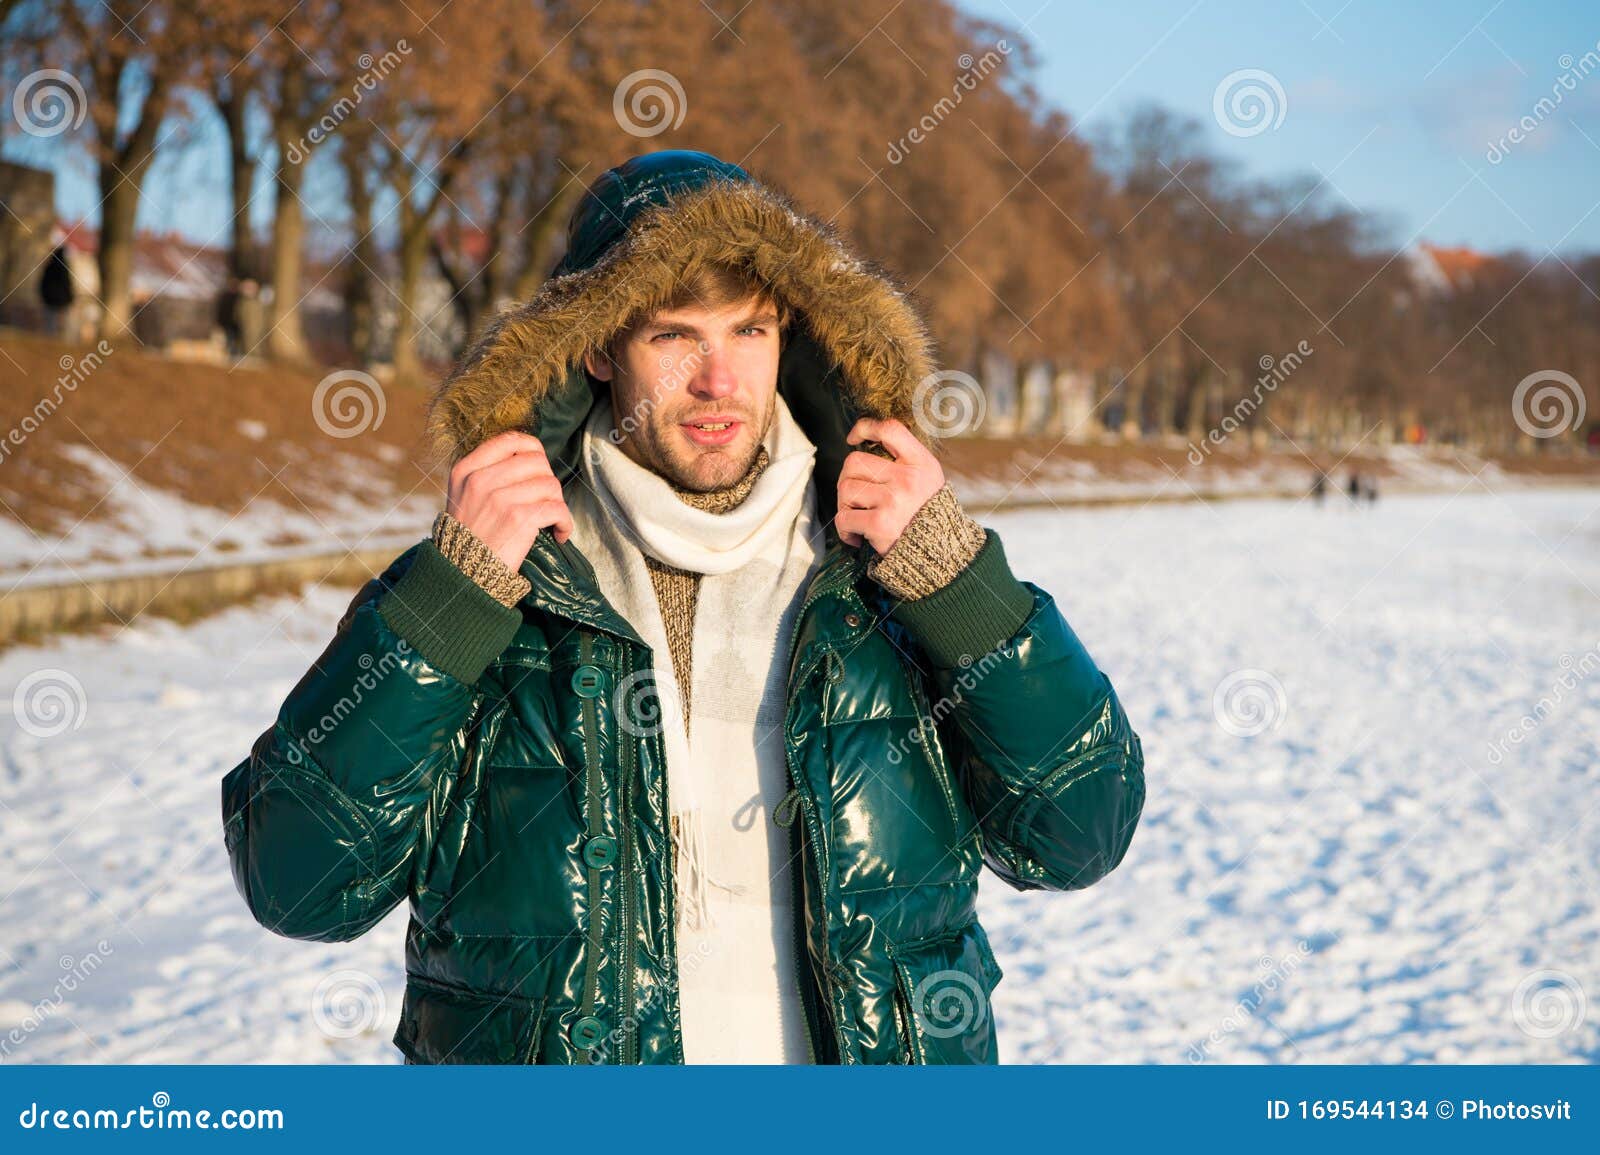 Travel and Vacation Concept. Winter Outfit. Guy Jacket Hood. Man Warm ...